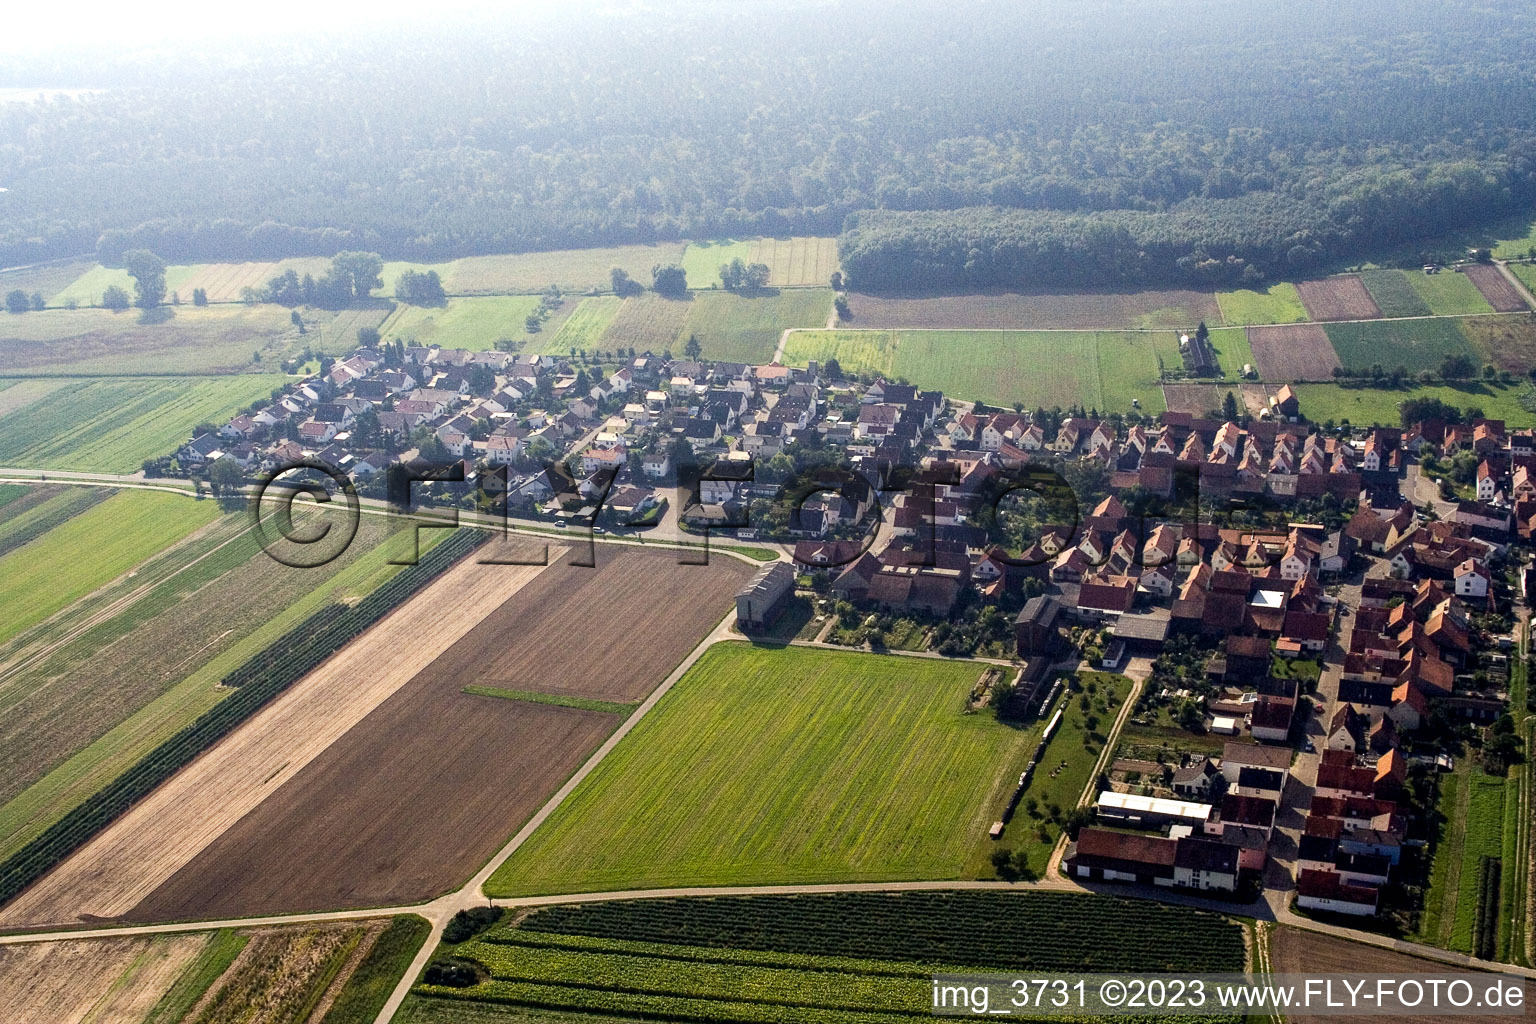 Hatzenbühl in the state Rhineland-Palatinate, Germany seen from a drone